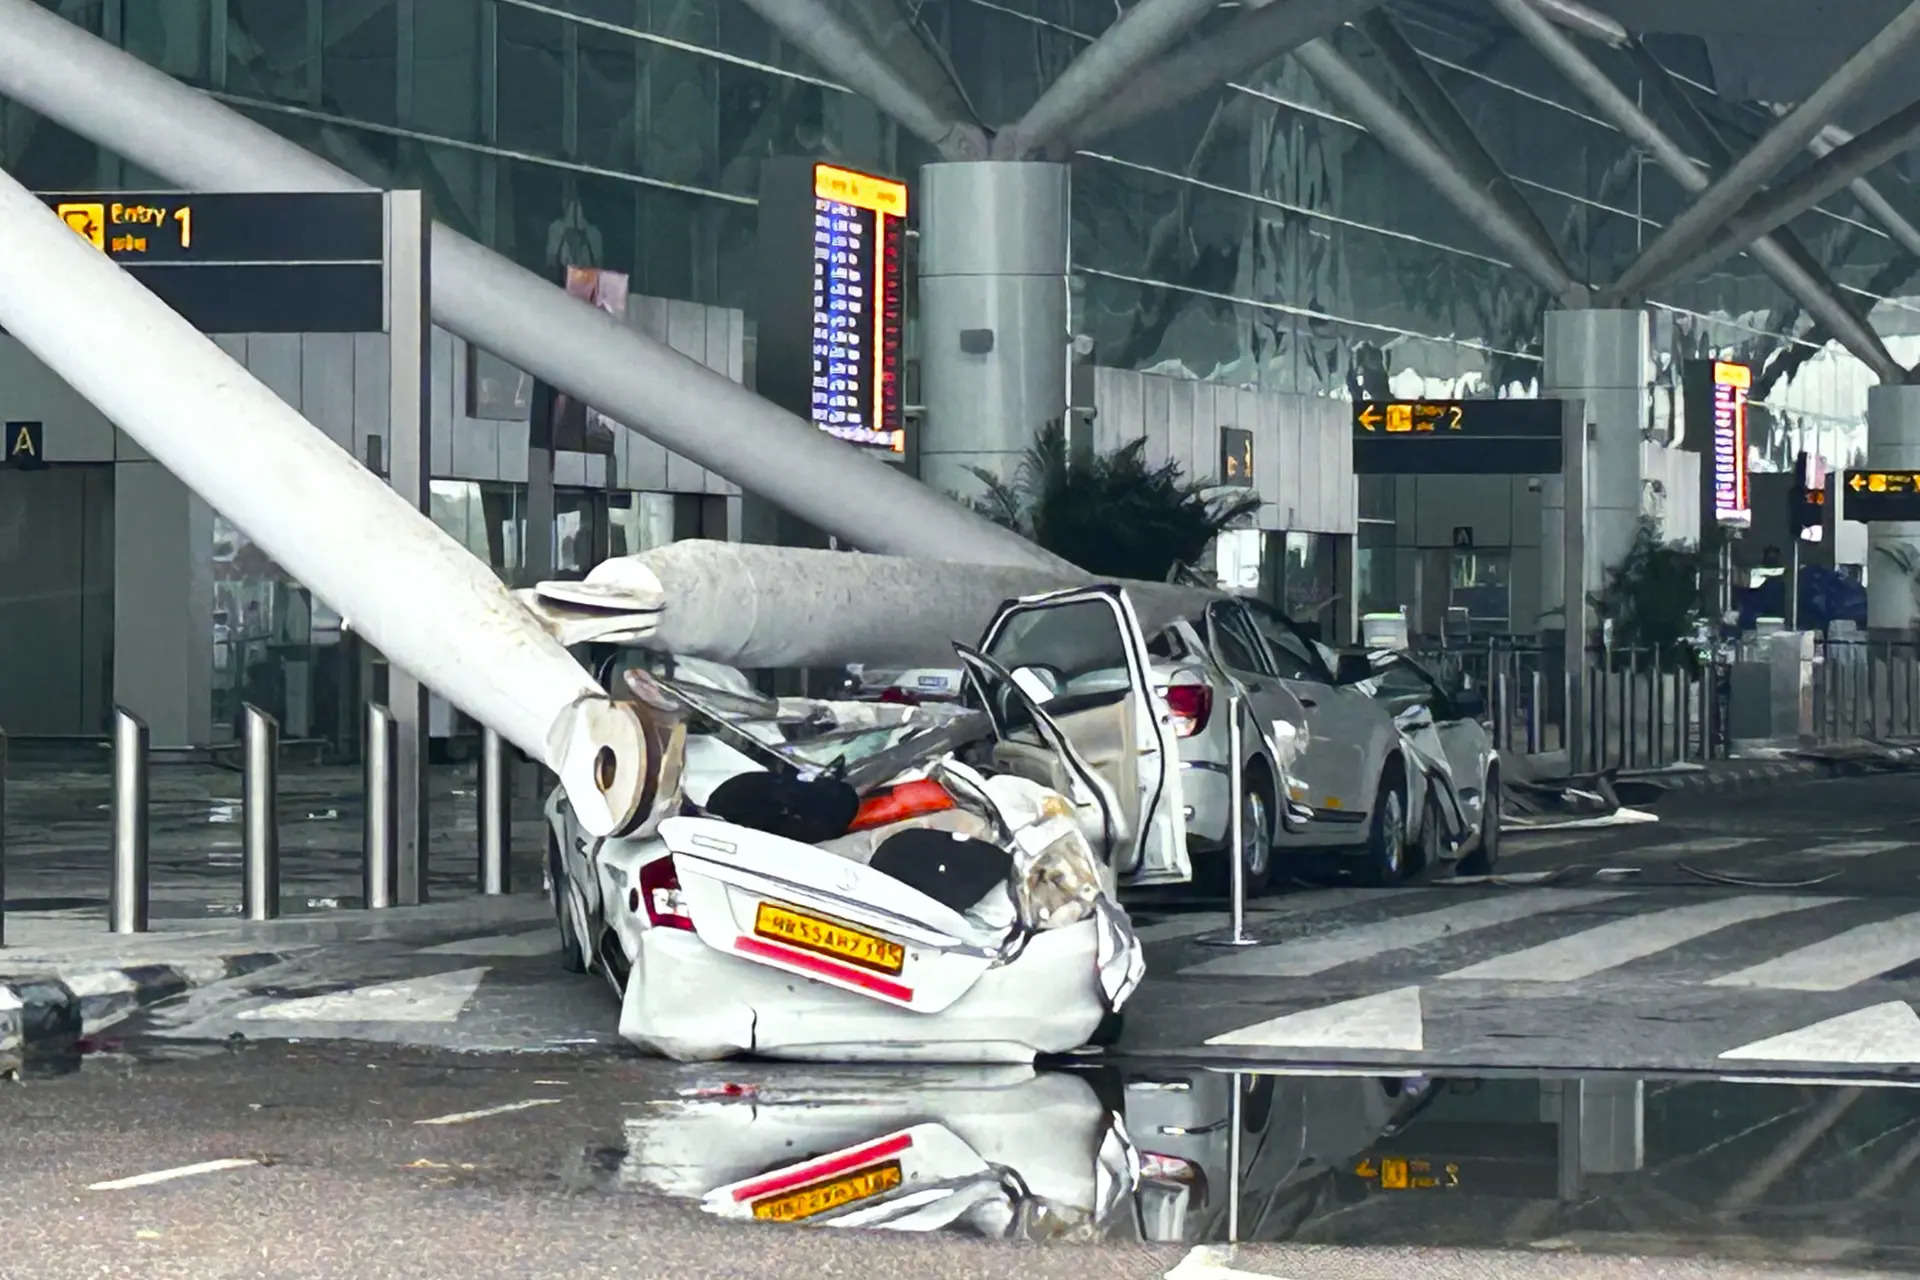 Delhi airport roof collapse: L&T issues clarification as probe starts 